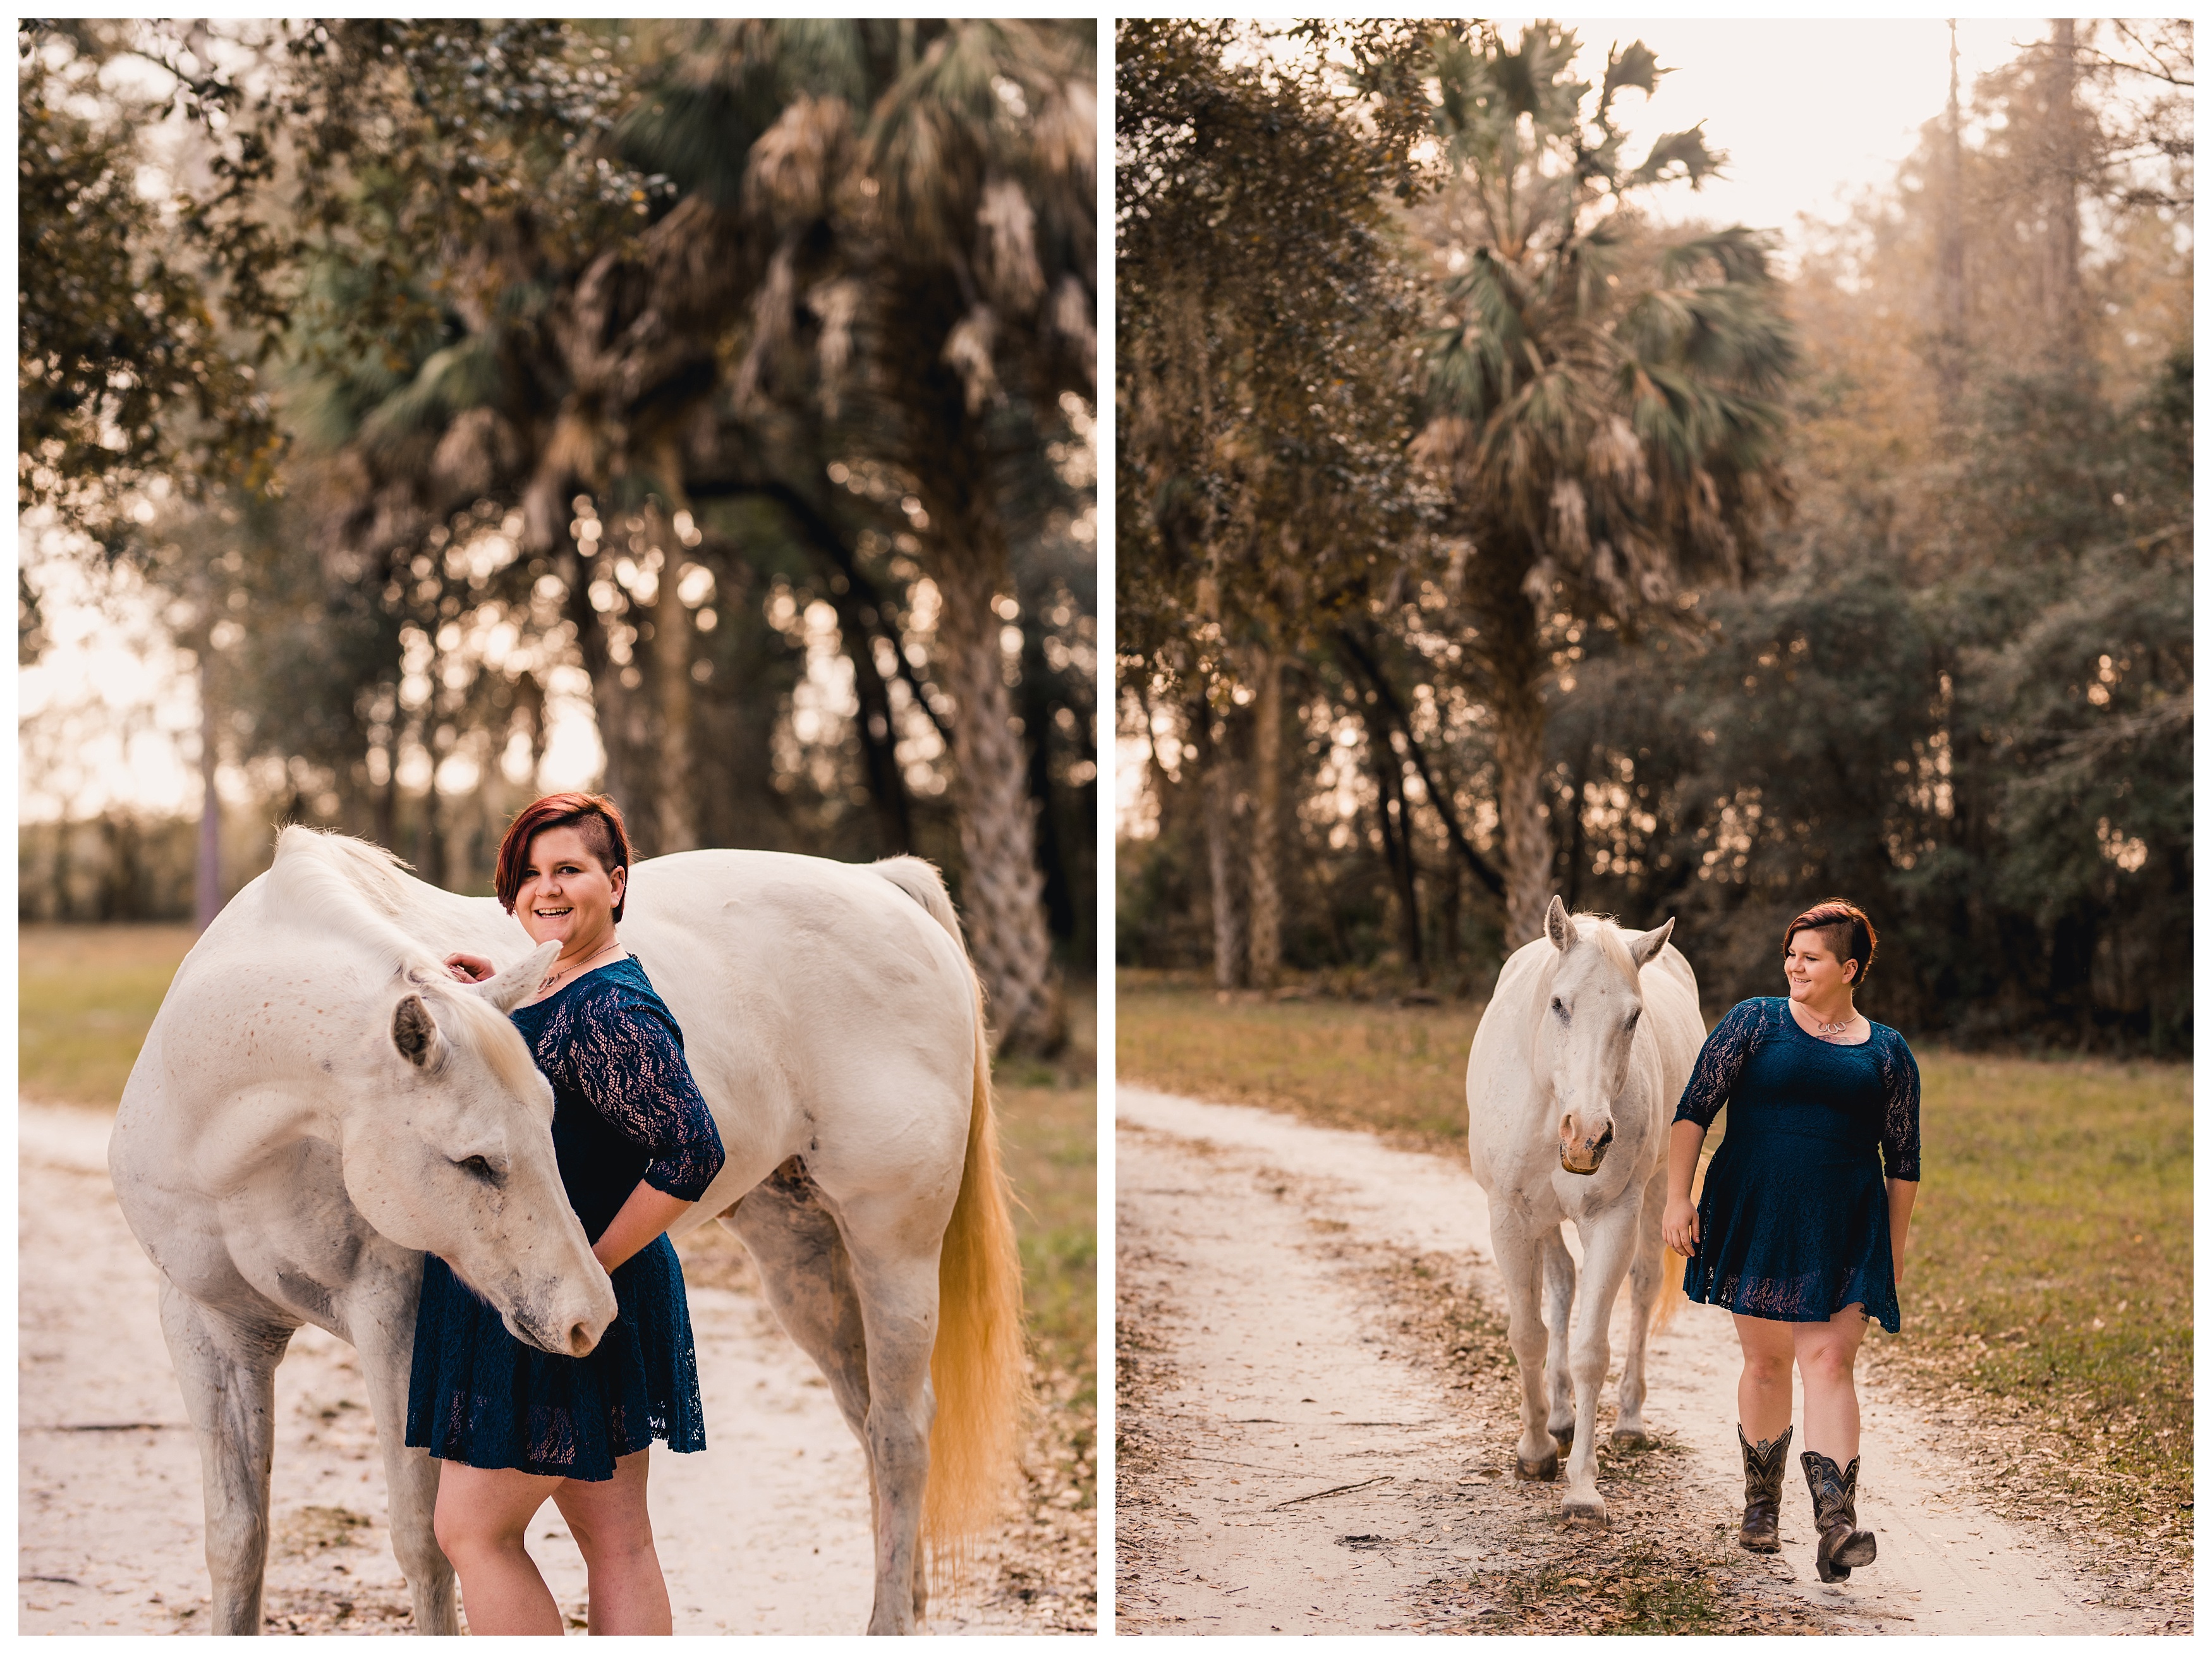 Mounted shooting horse pictures in Gainesville, Florida. Shelly Williams Photography